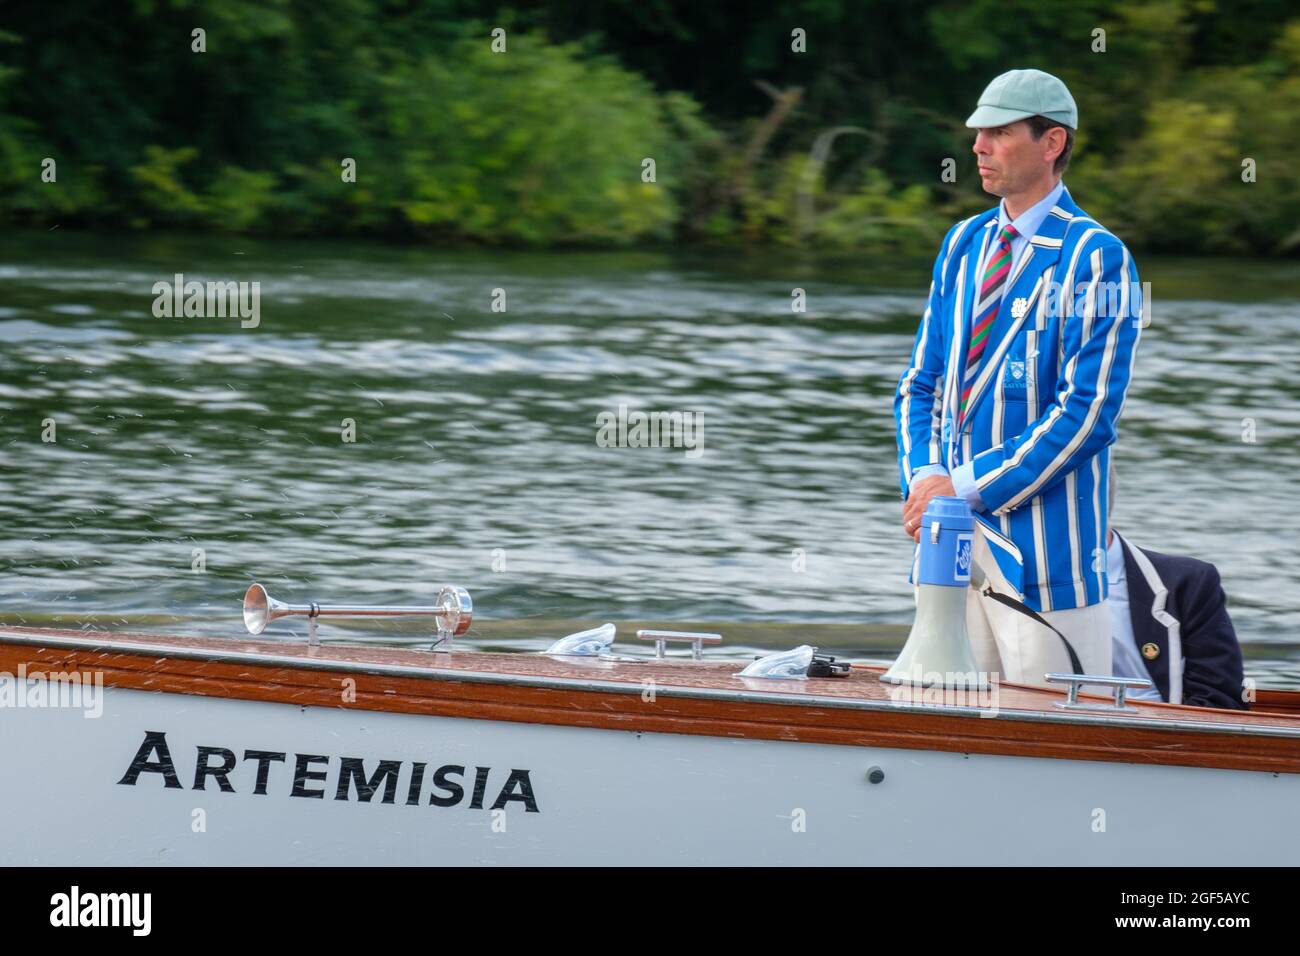 An umpire in a blue and white blazer and blue cap on the Umpire's Launch Artemisia at Henley Royal Regatta 2021 on the River Thames Stock Photo